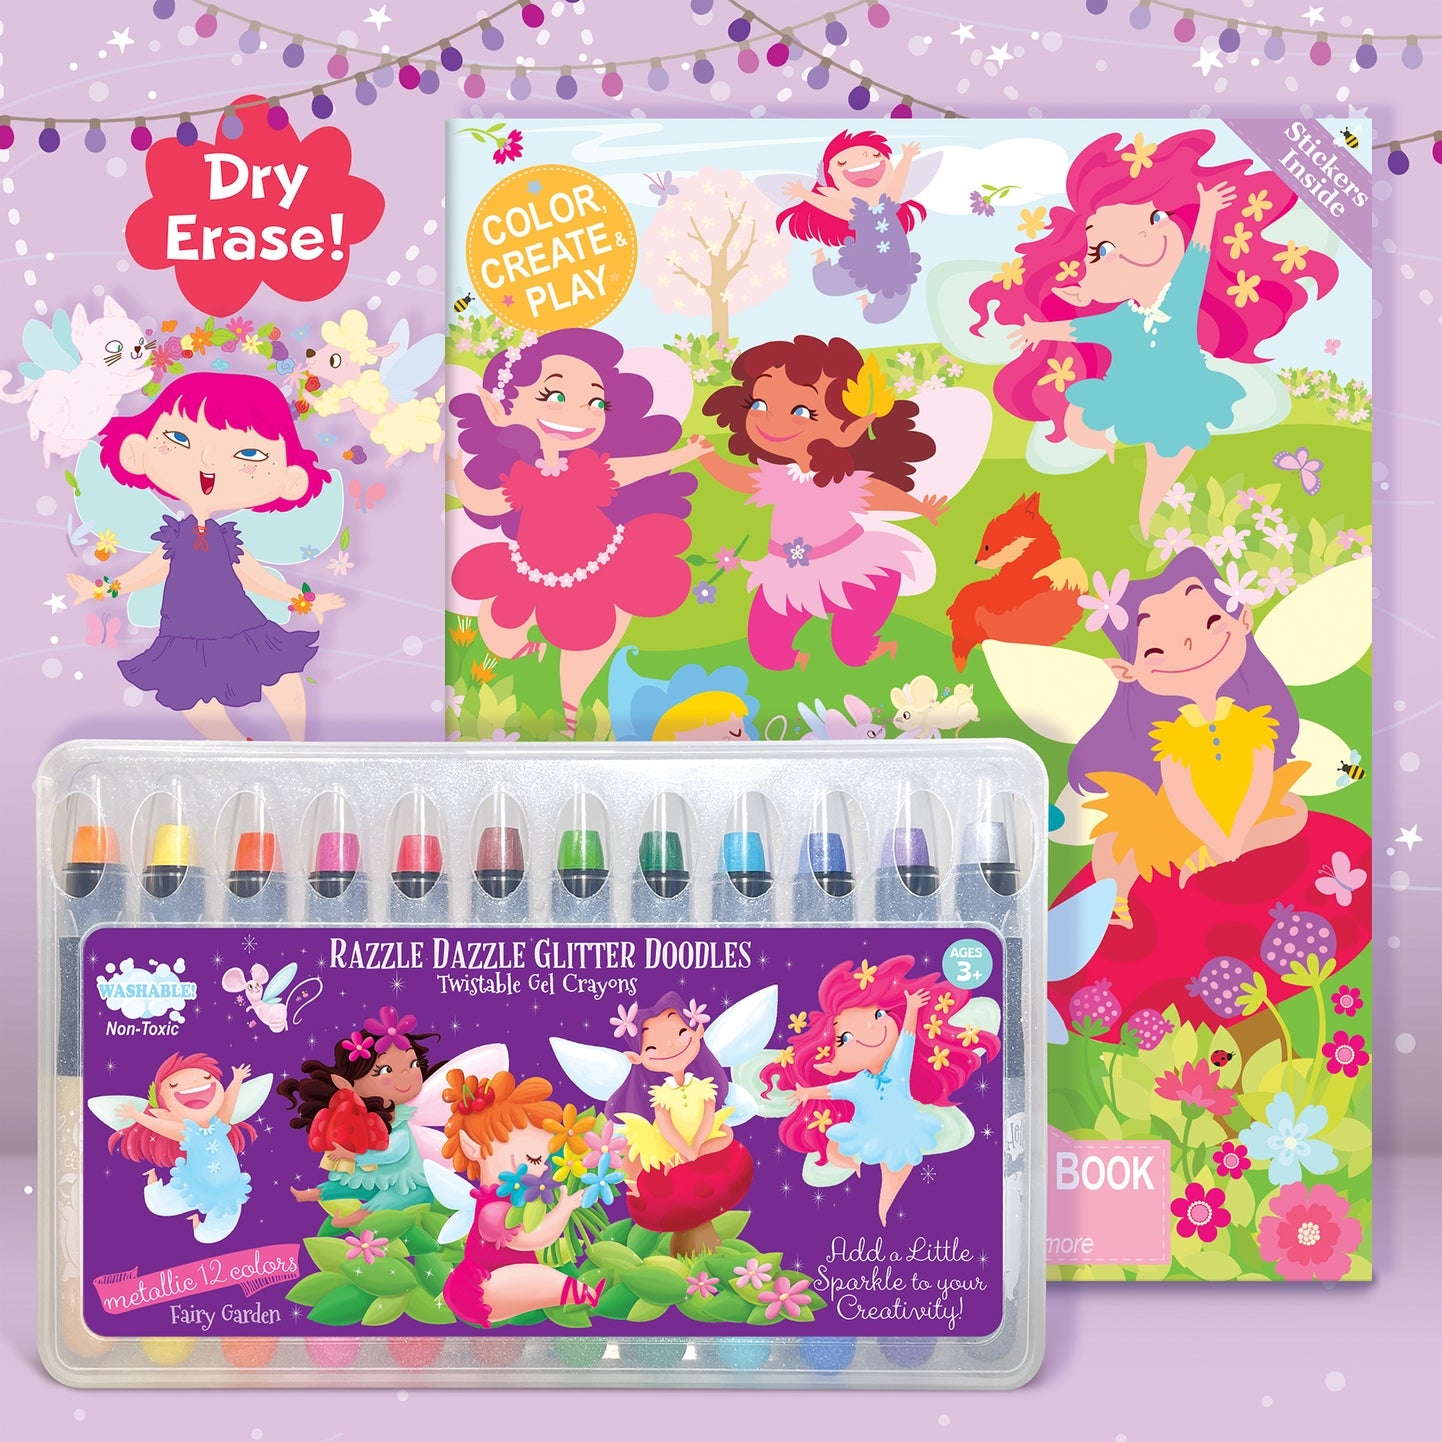 Glitter Fairy Dry Erase Coloring Gift Set - Twinkle Twinkle Little One